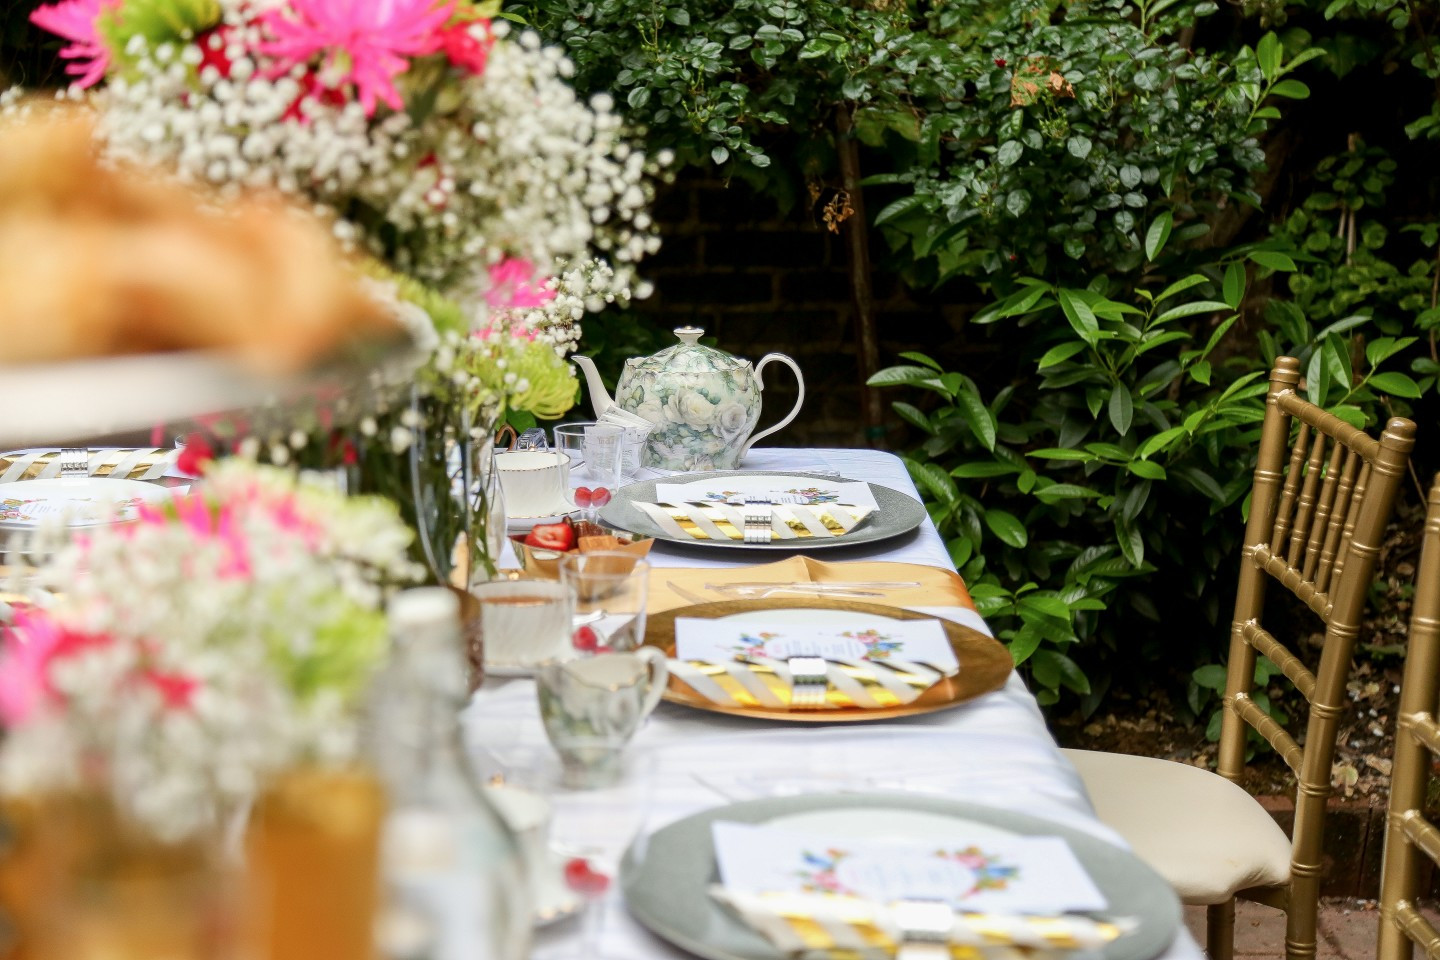 Summer Afternoon Tea Party Ideas
 Indian Afternoon Tea Tea Party Giveaway